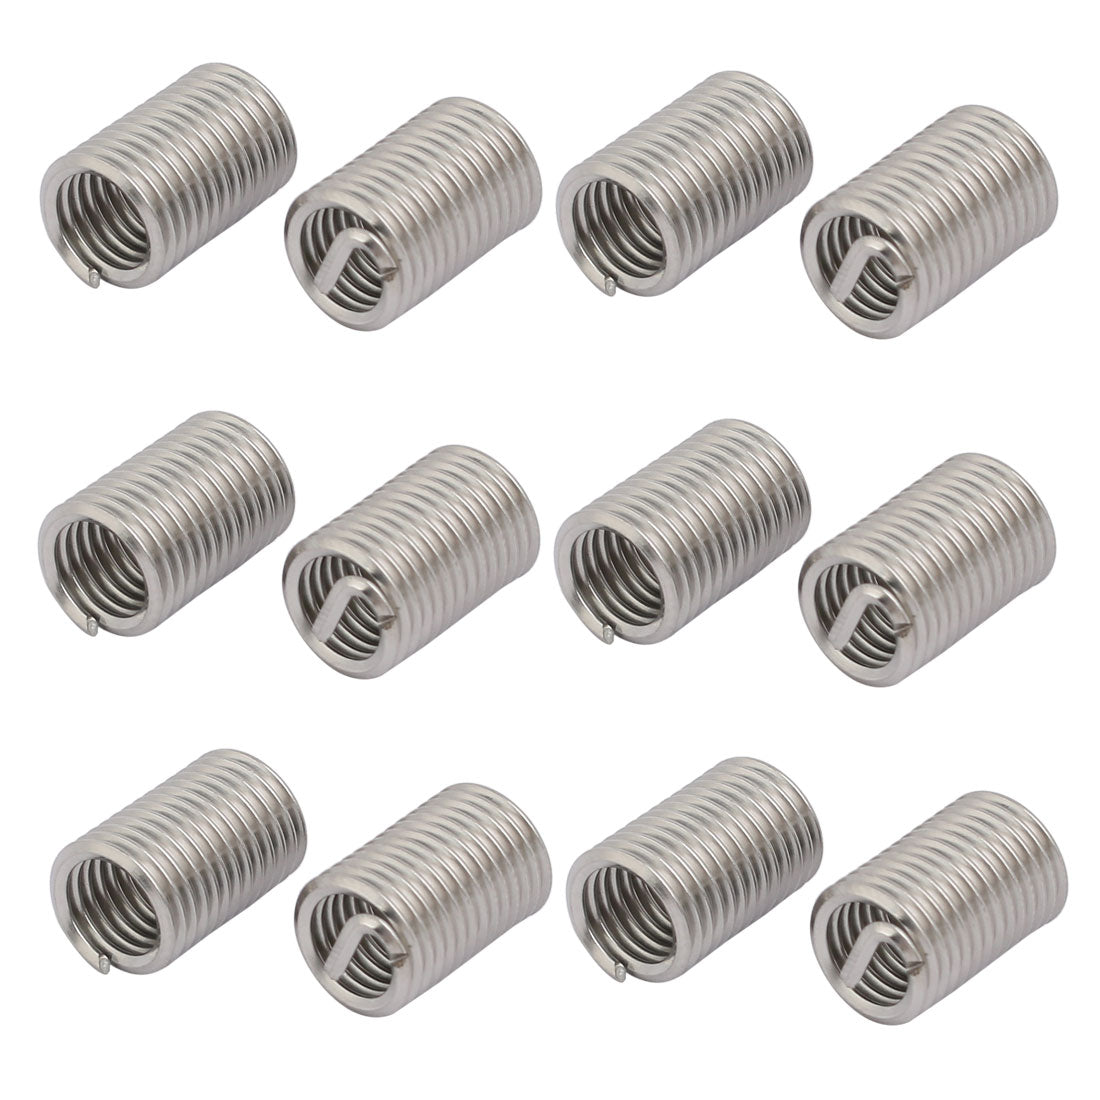 uxcell Uxcell M8x1.25mmx20mm 304 Stainless Steel Helical Coil Wire Thread Insert 12pcs